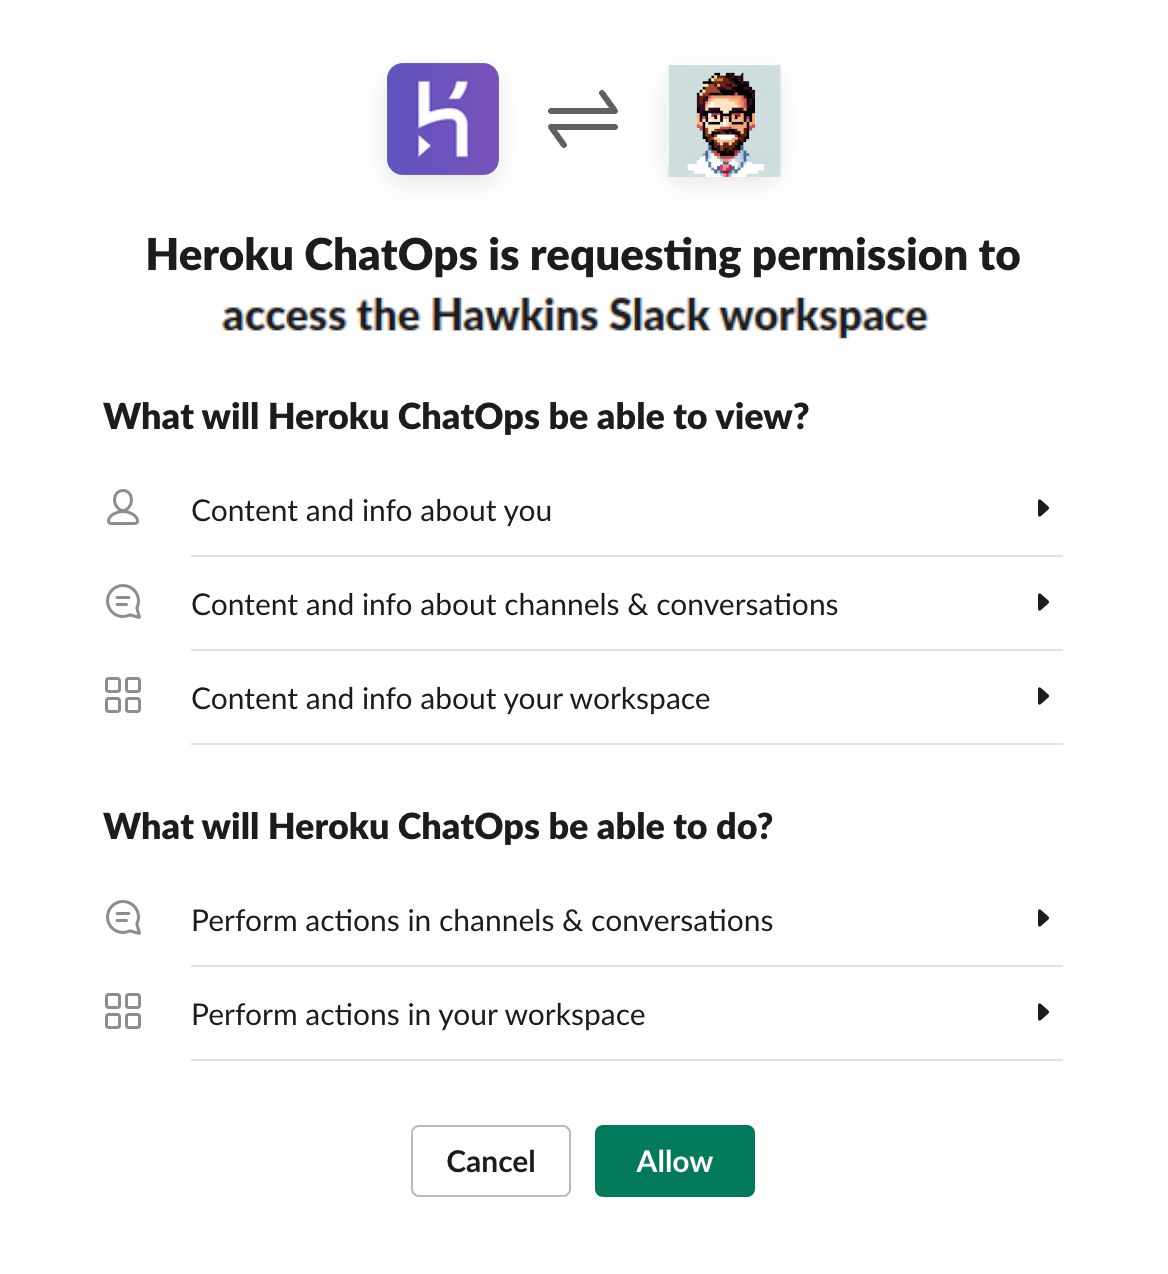 Grant Heroku ChatOps access to your Slack workspace